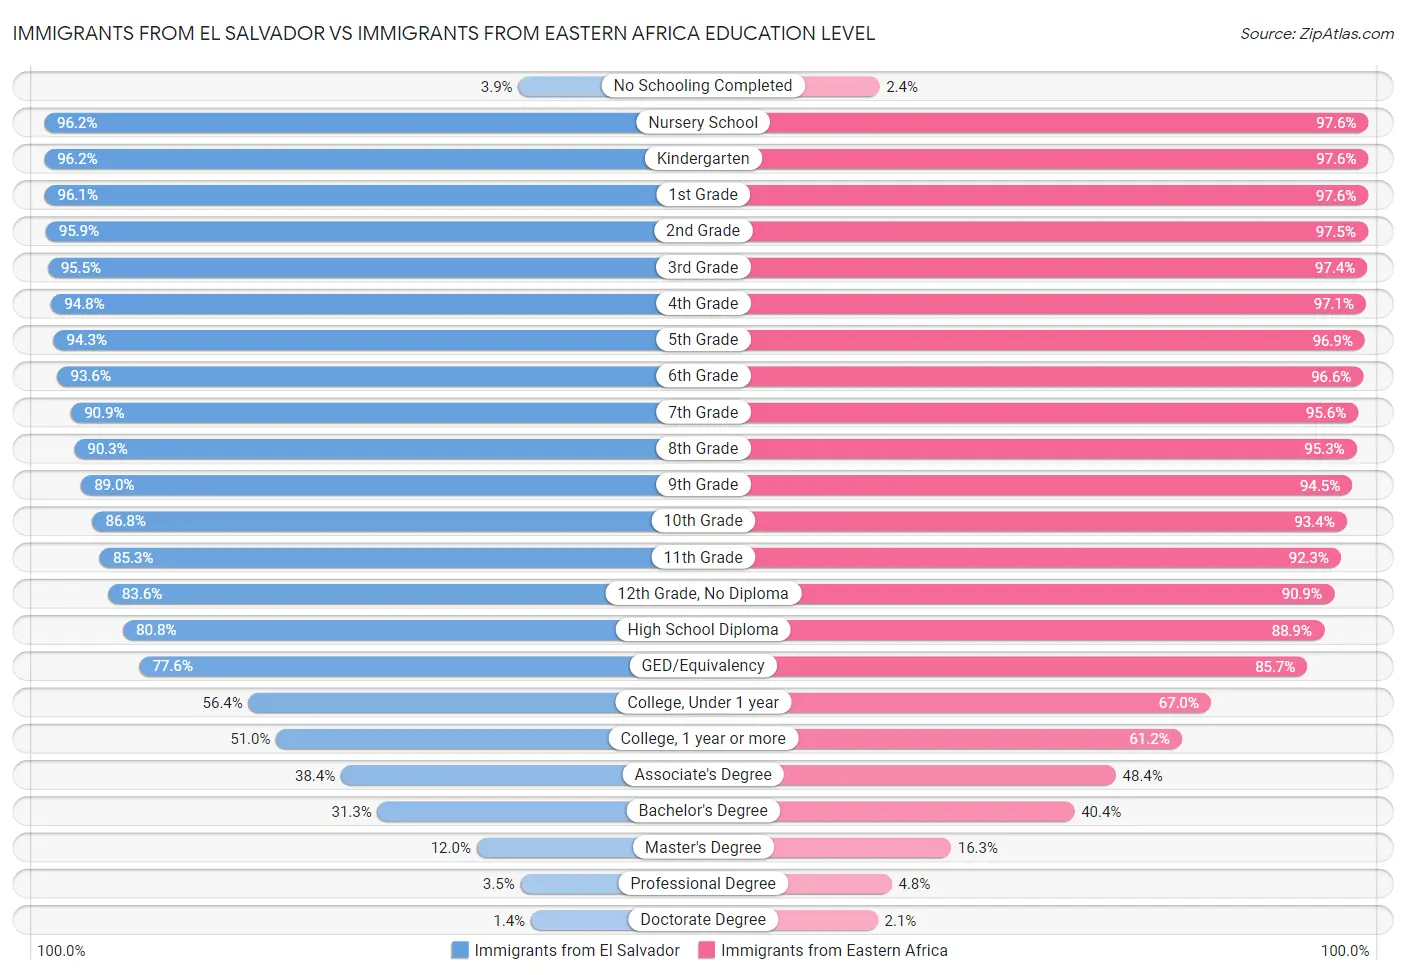 Immigrants from El Salvador vs Immigrants from Eastern Africa Education Level